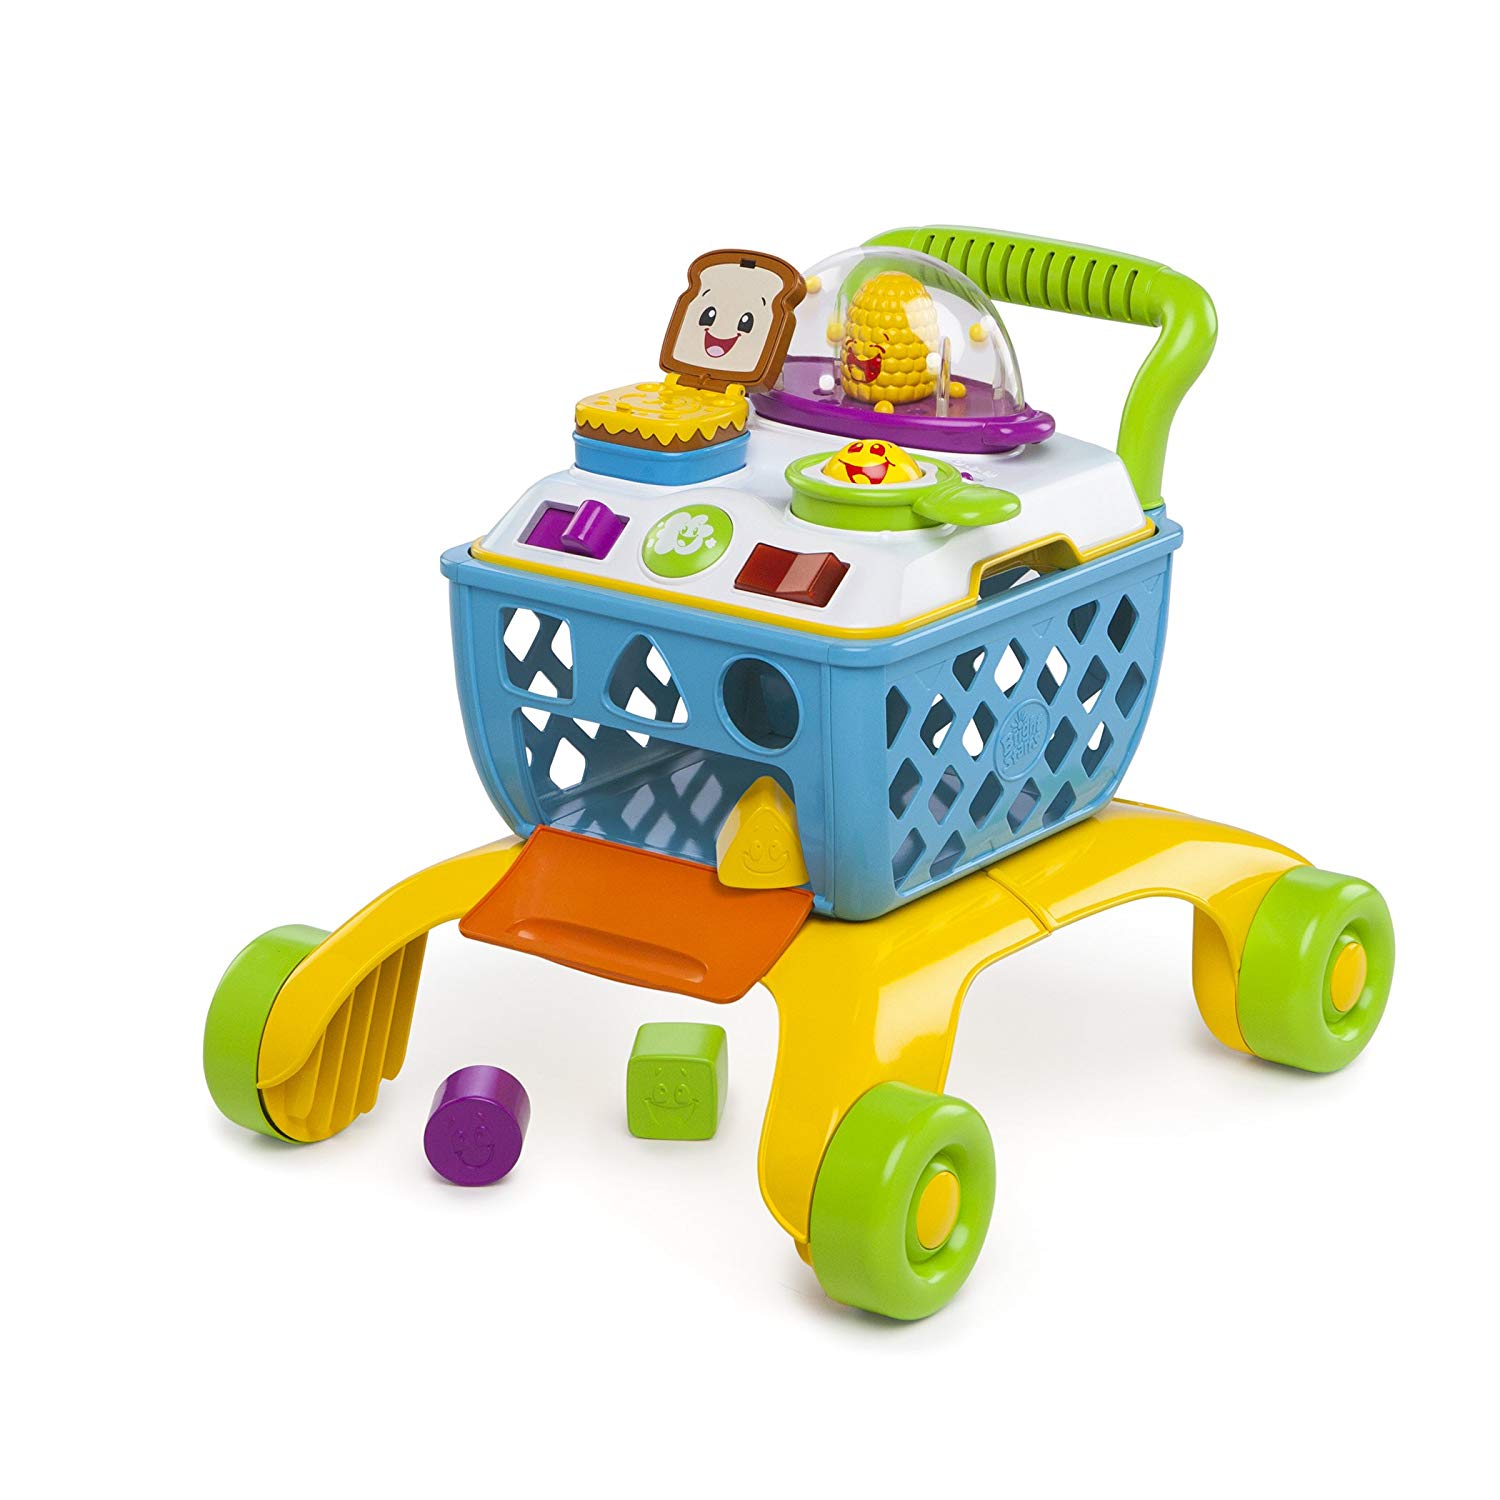 push toys for babies learning to walk